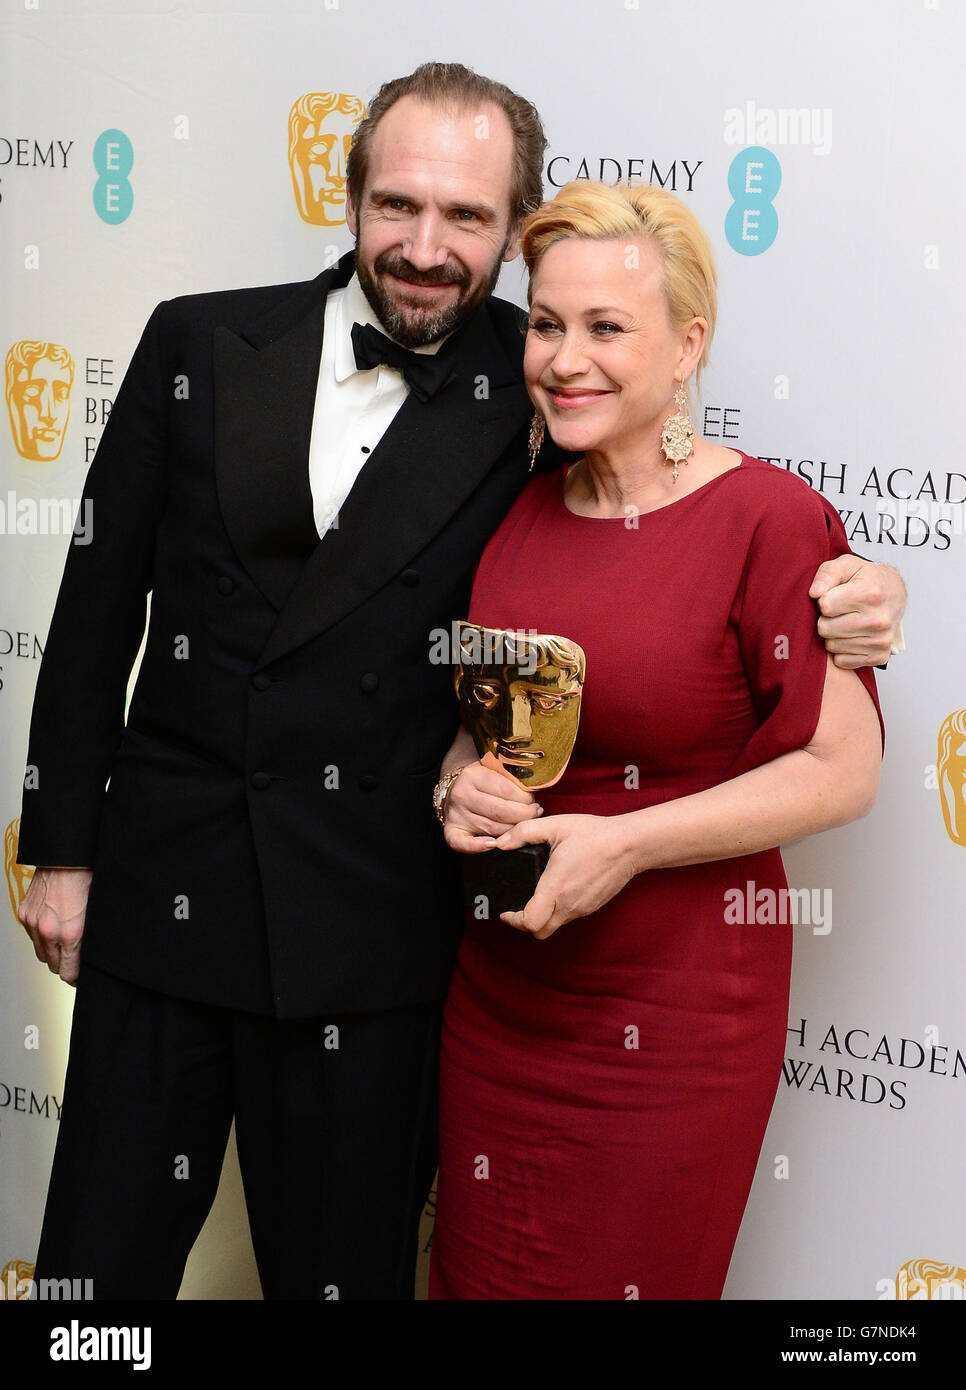 Ralph Fiennes and Patricia Arquette attends the after show party for the EE British Academy Film Awards at the Grosvenor House Hotel in central London. Stock Photo